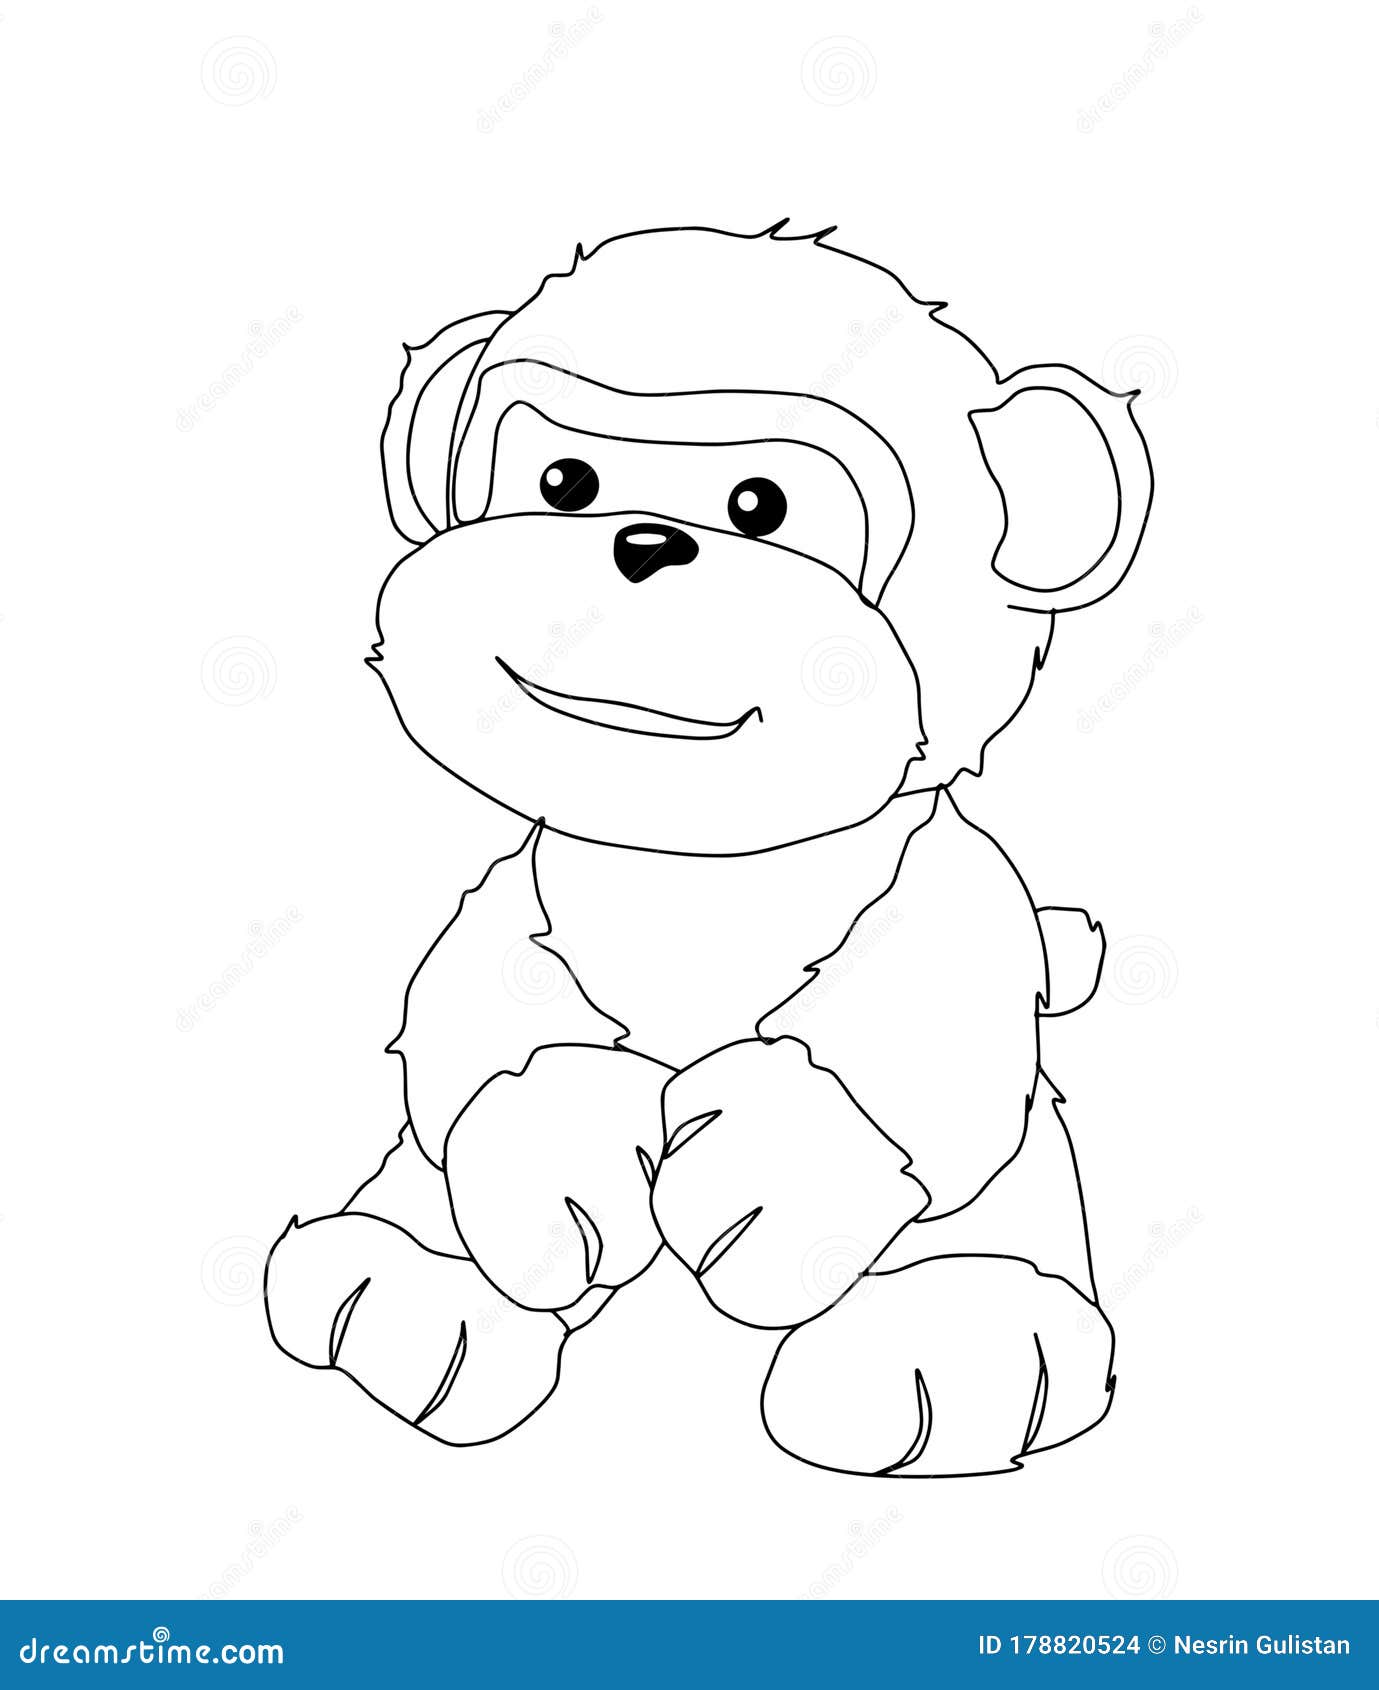 Cute Little Monkey Coloring Page Kids Coloring Book, Coloring ...